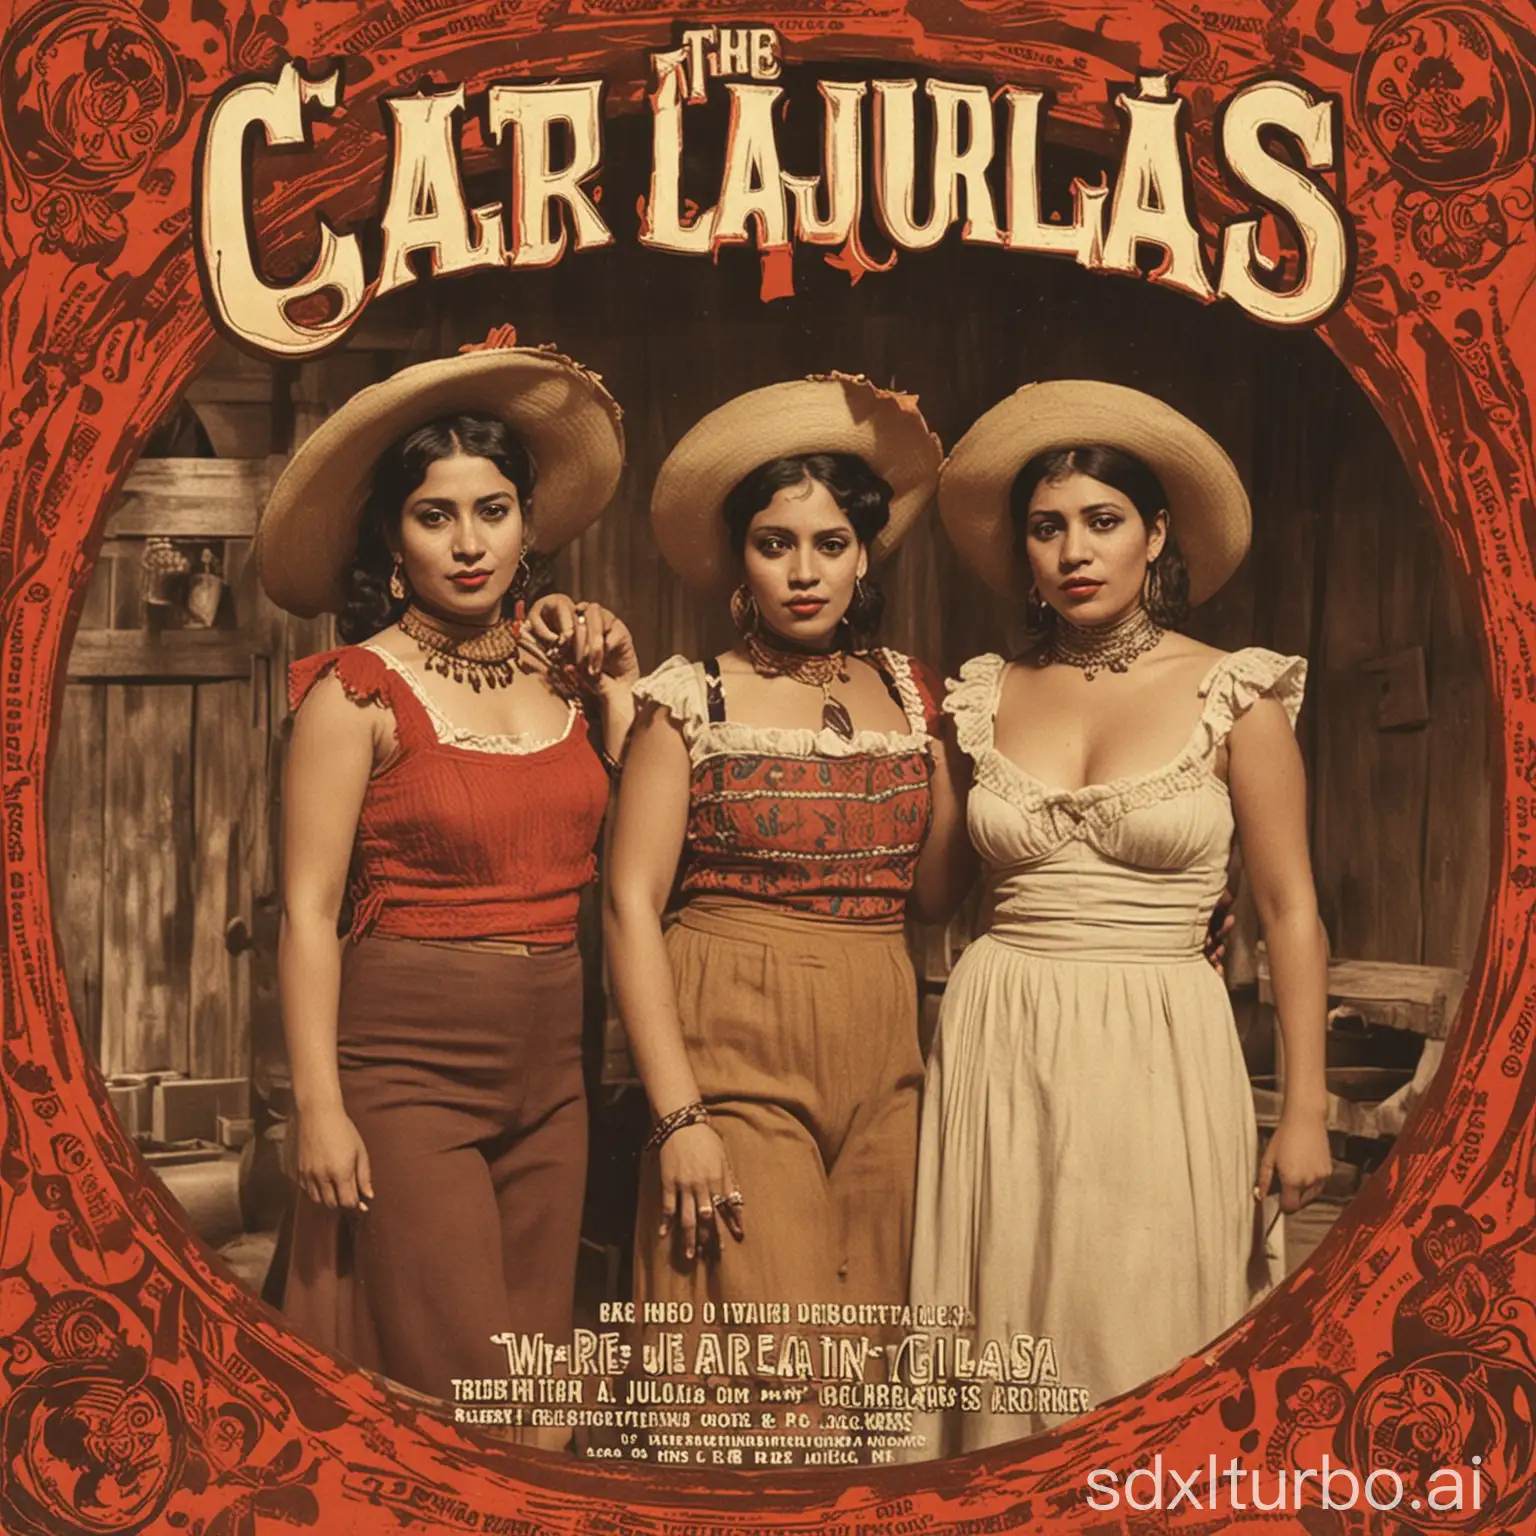 Mexican-Cantina-Cabaret-Vibrant-Performance-by-Two-Women-Singers